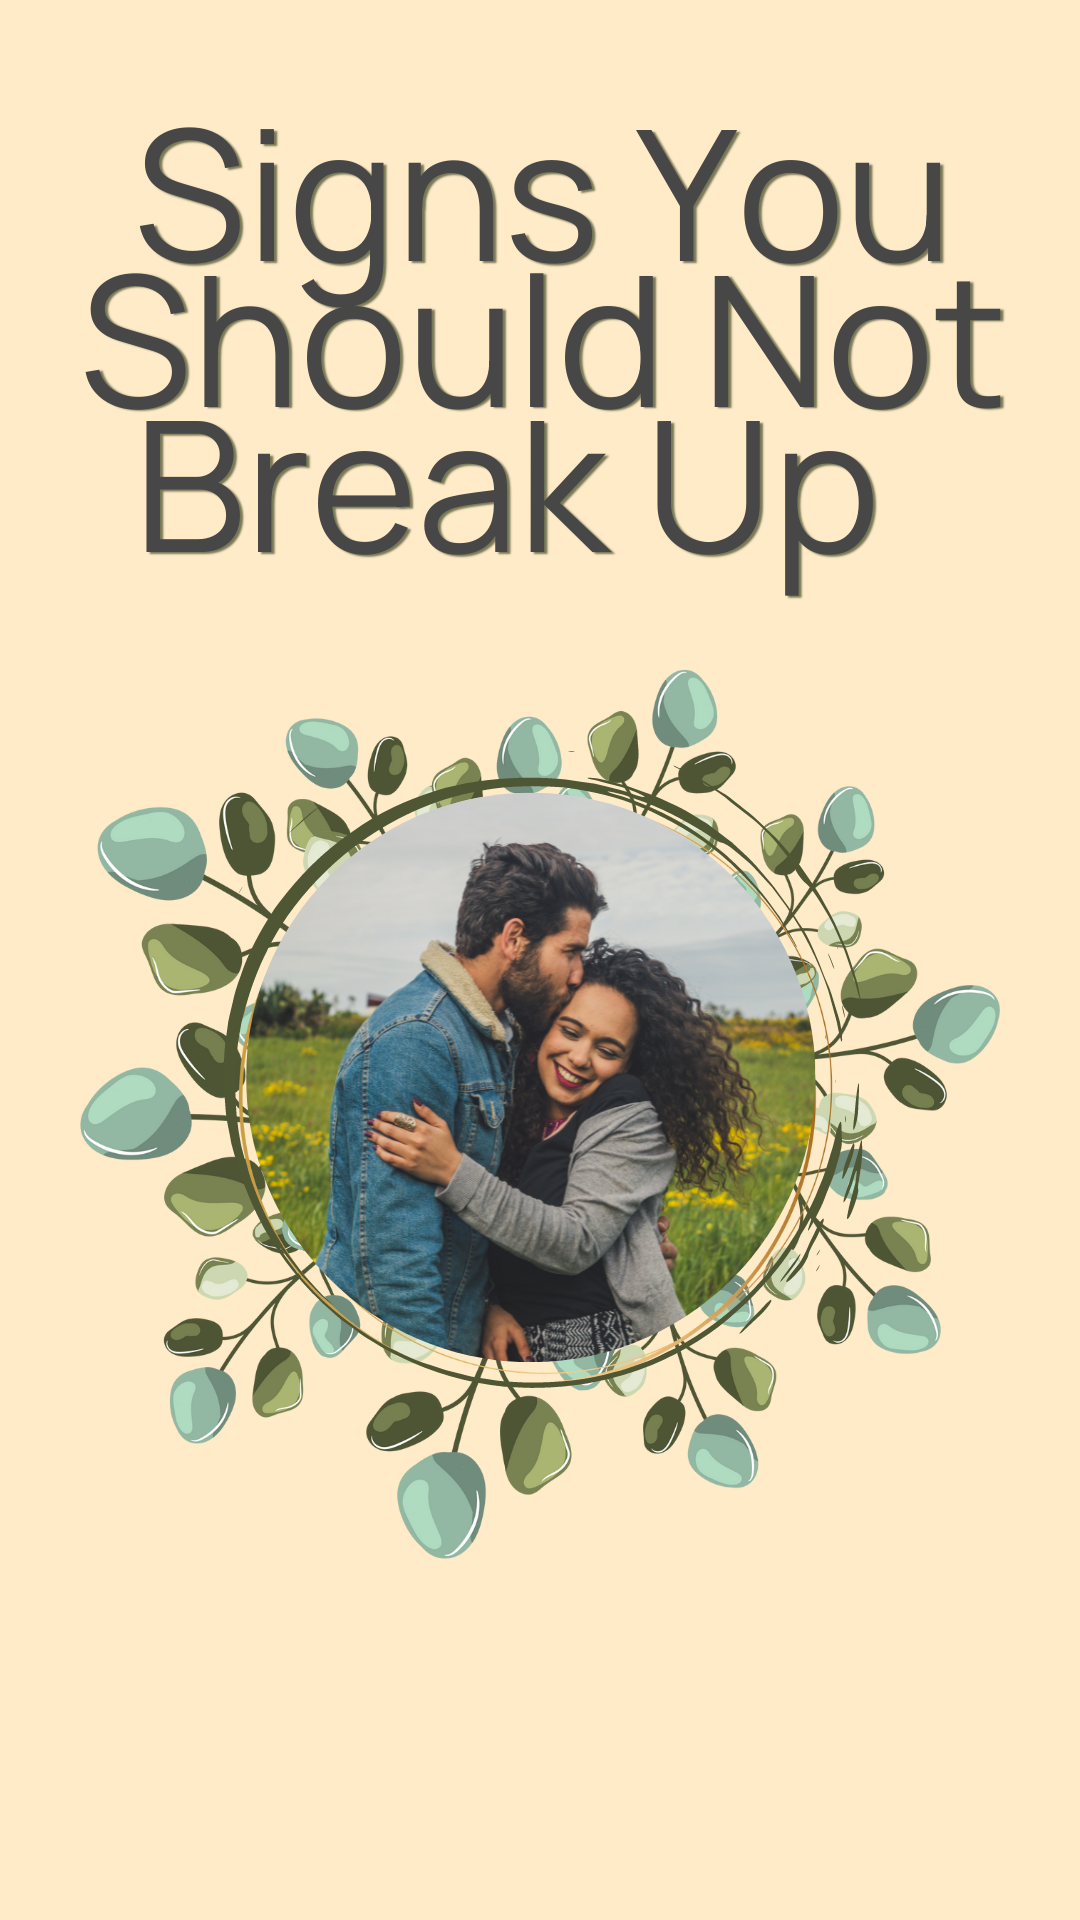 Signs you should not break up